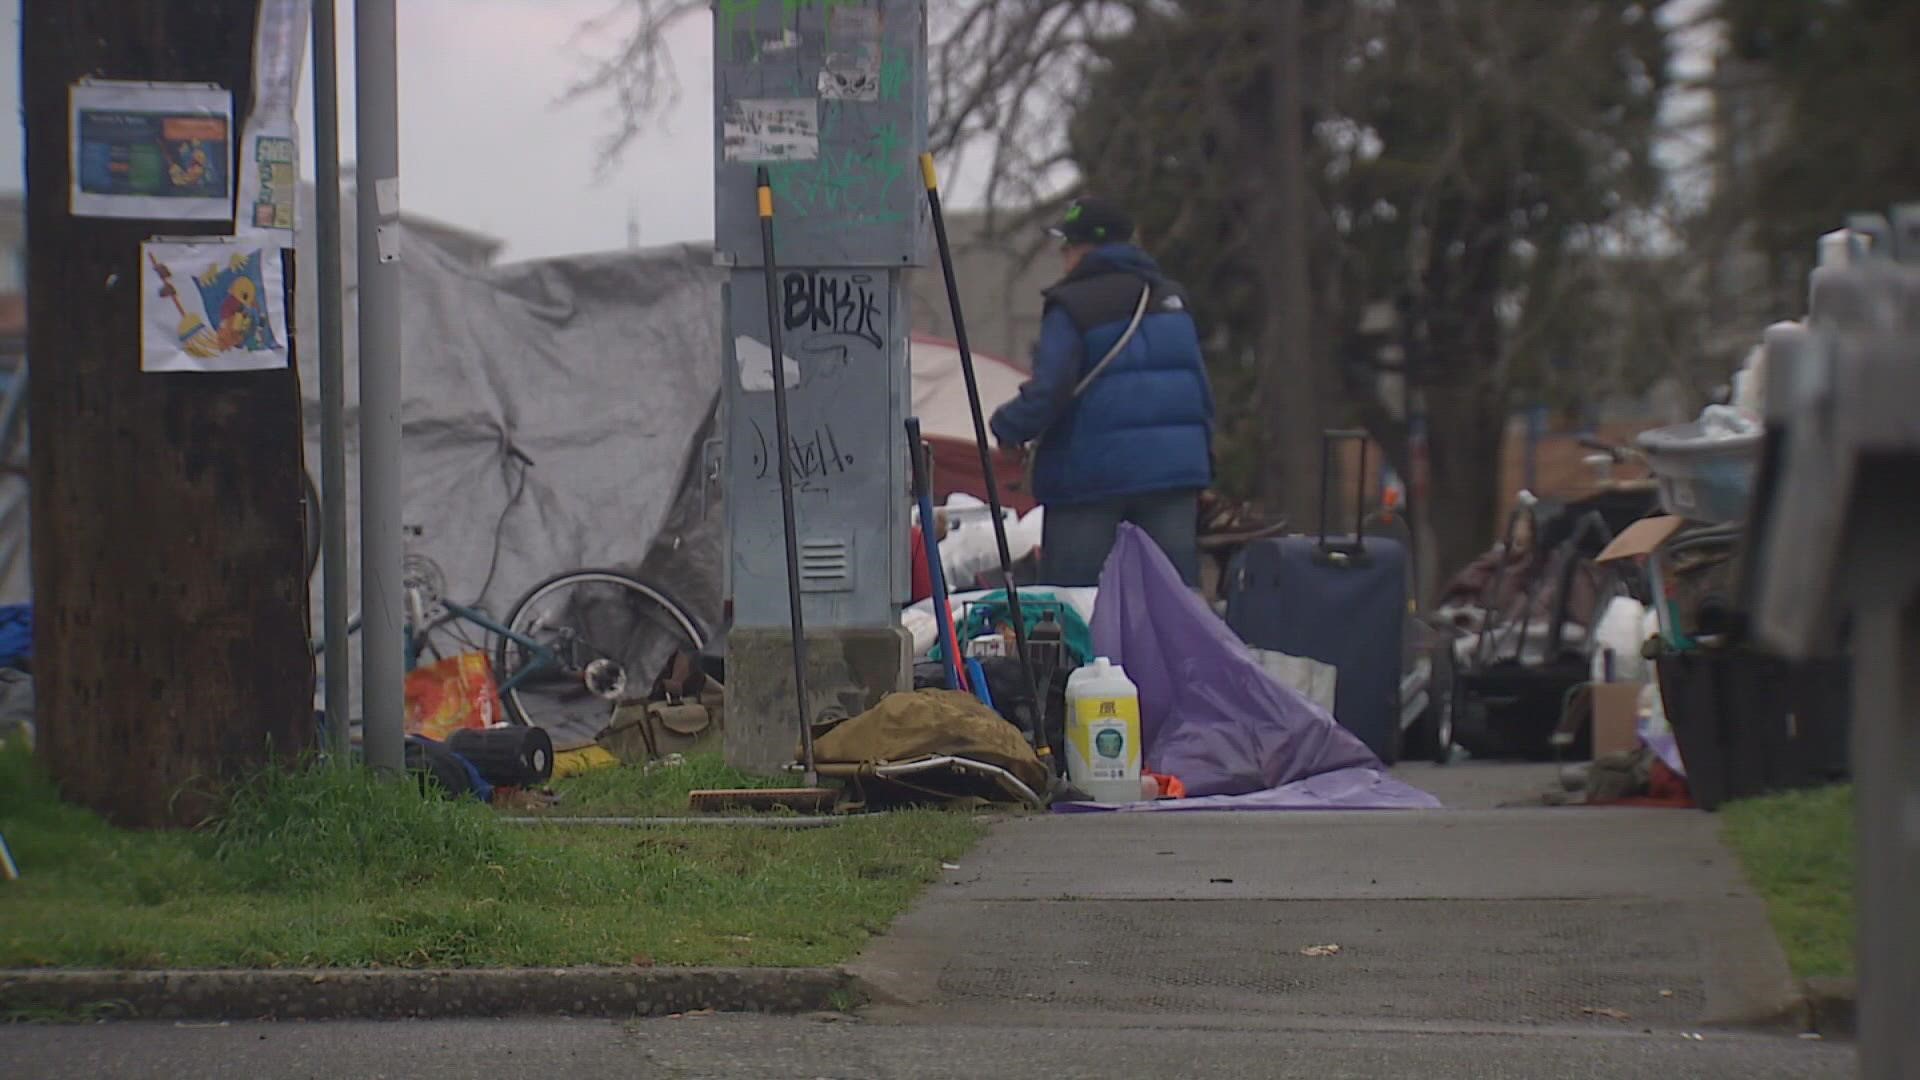 Last year, the city planned to consider a ban on camping on public property but the proposal was nixed out of concern for the number of people with personal property